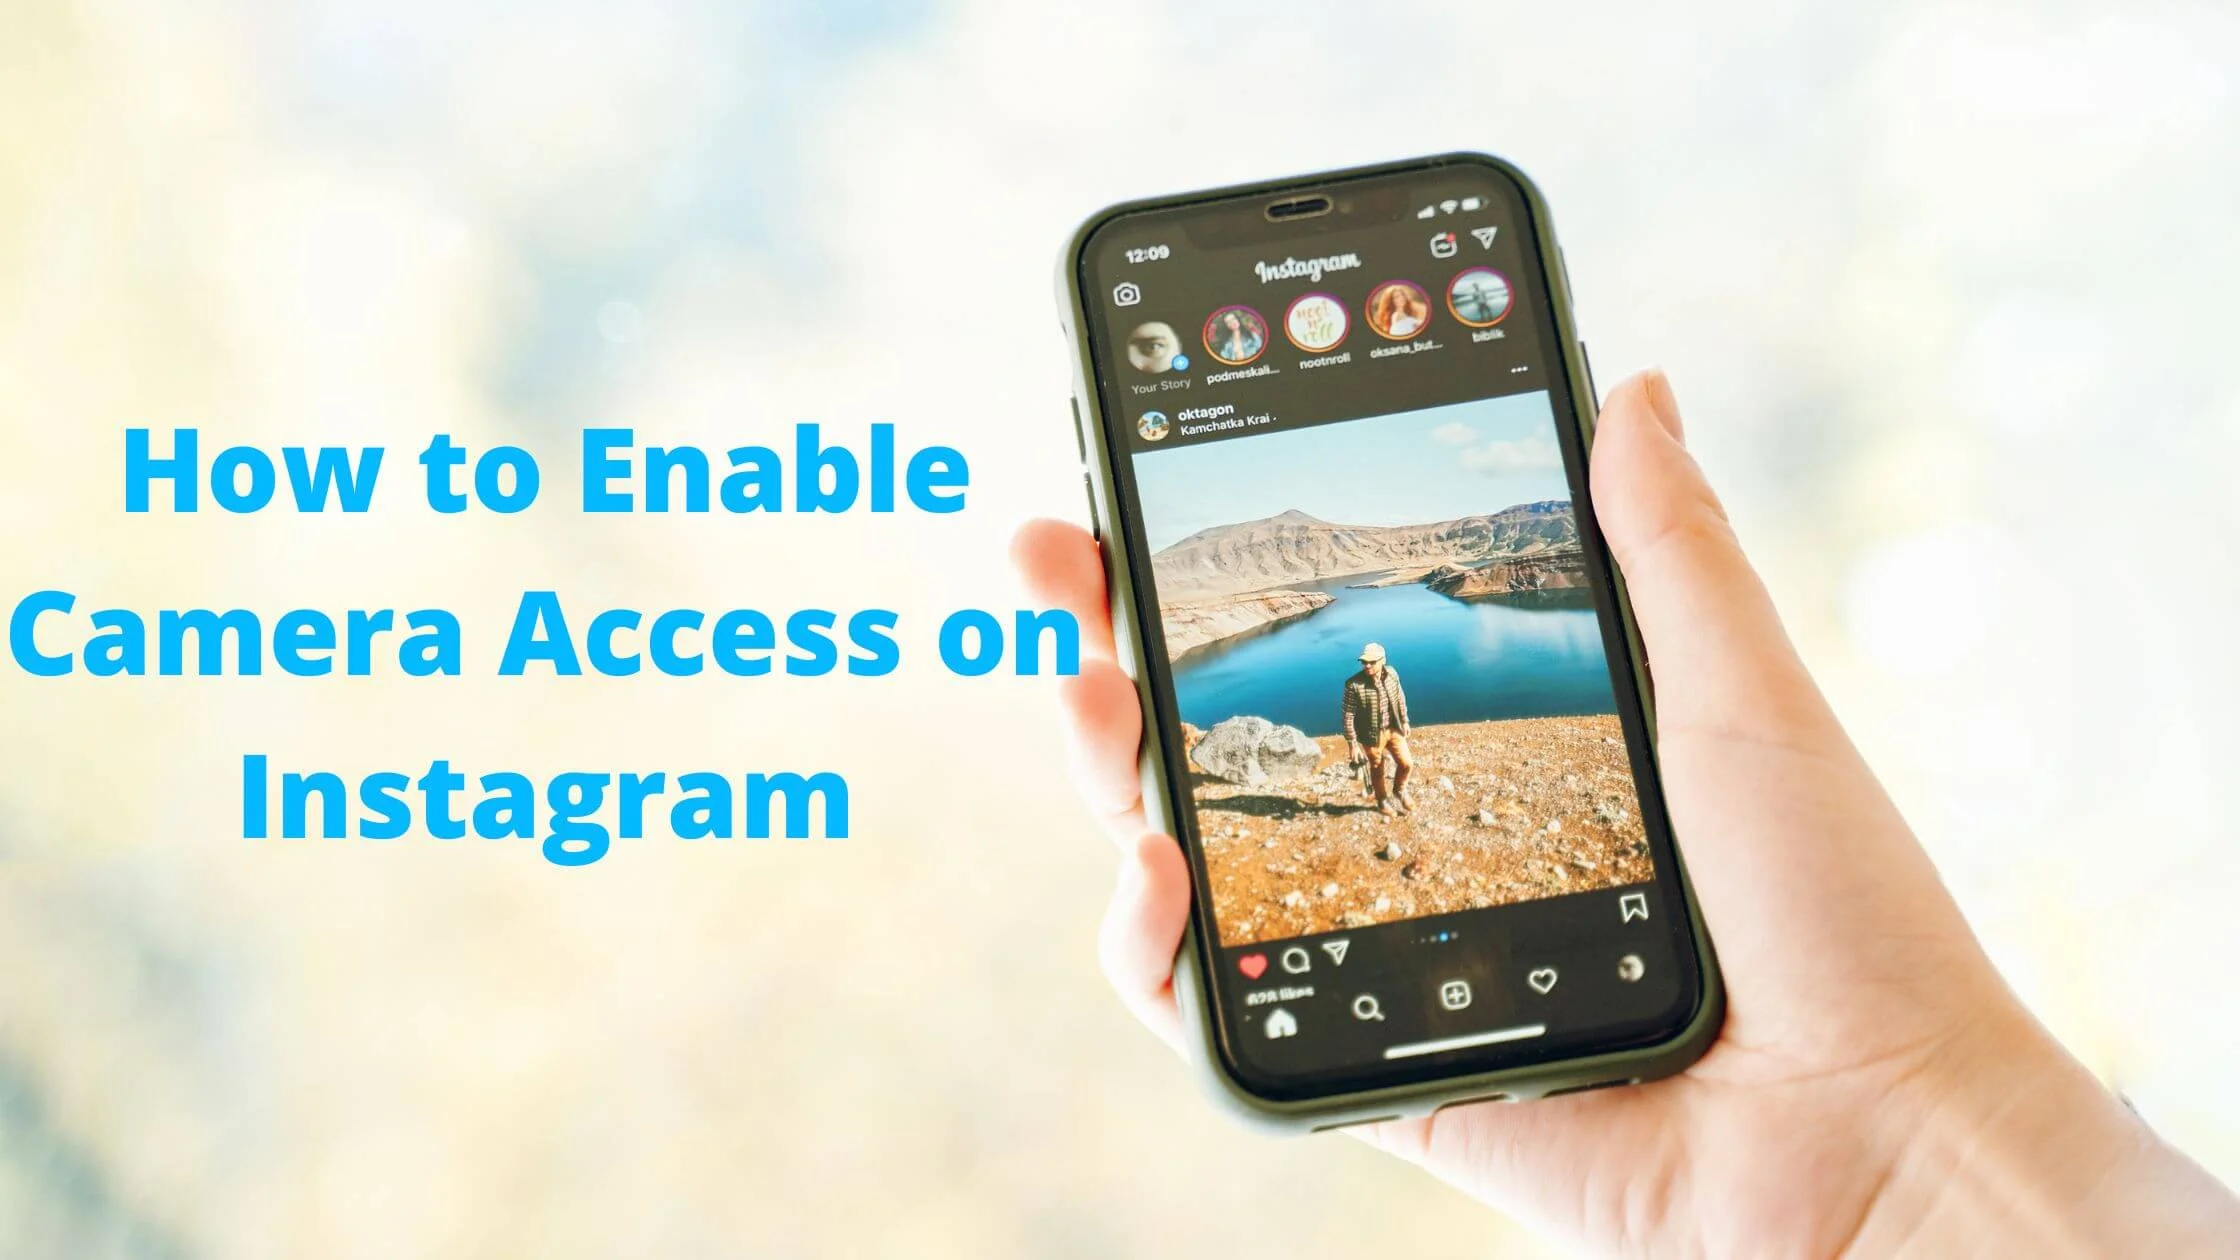 Enable Camera Access on Instagram